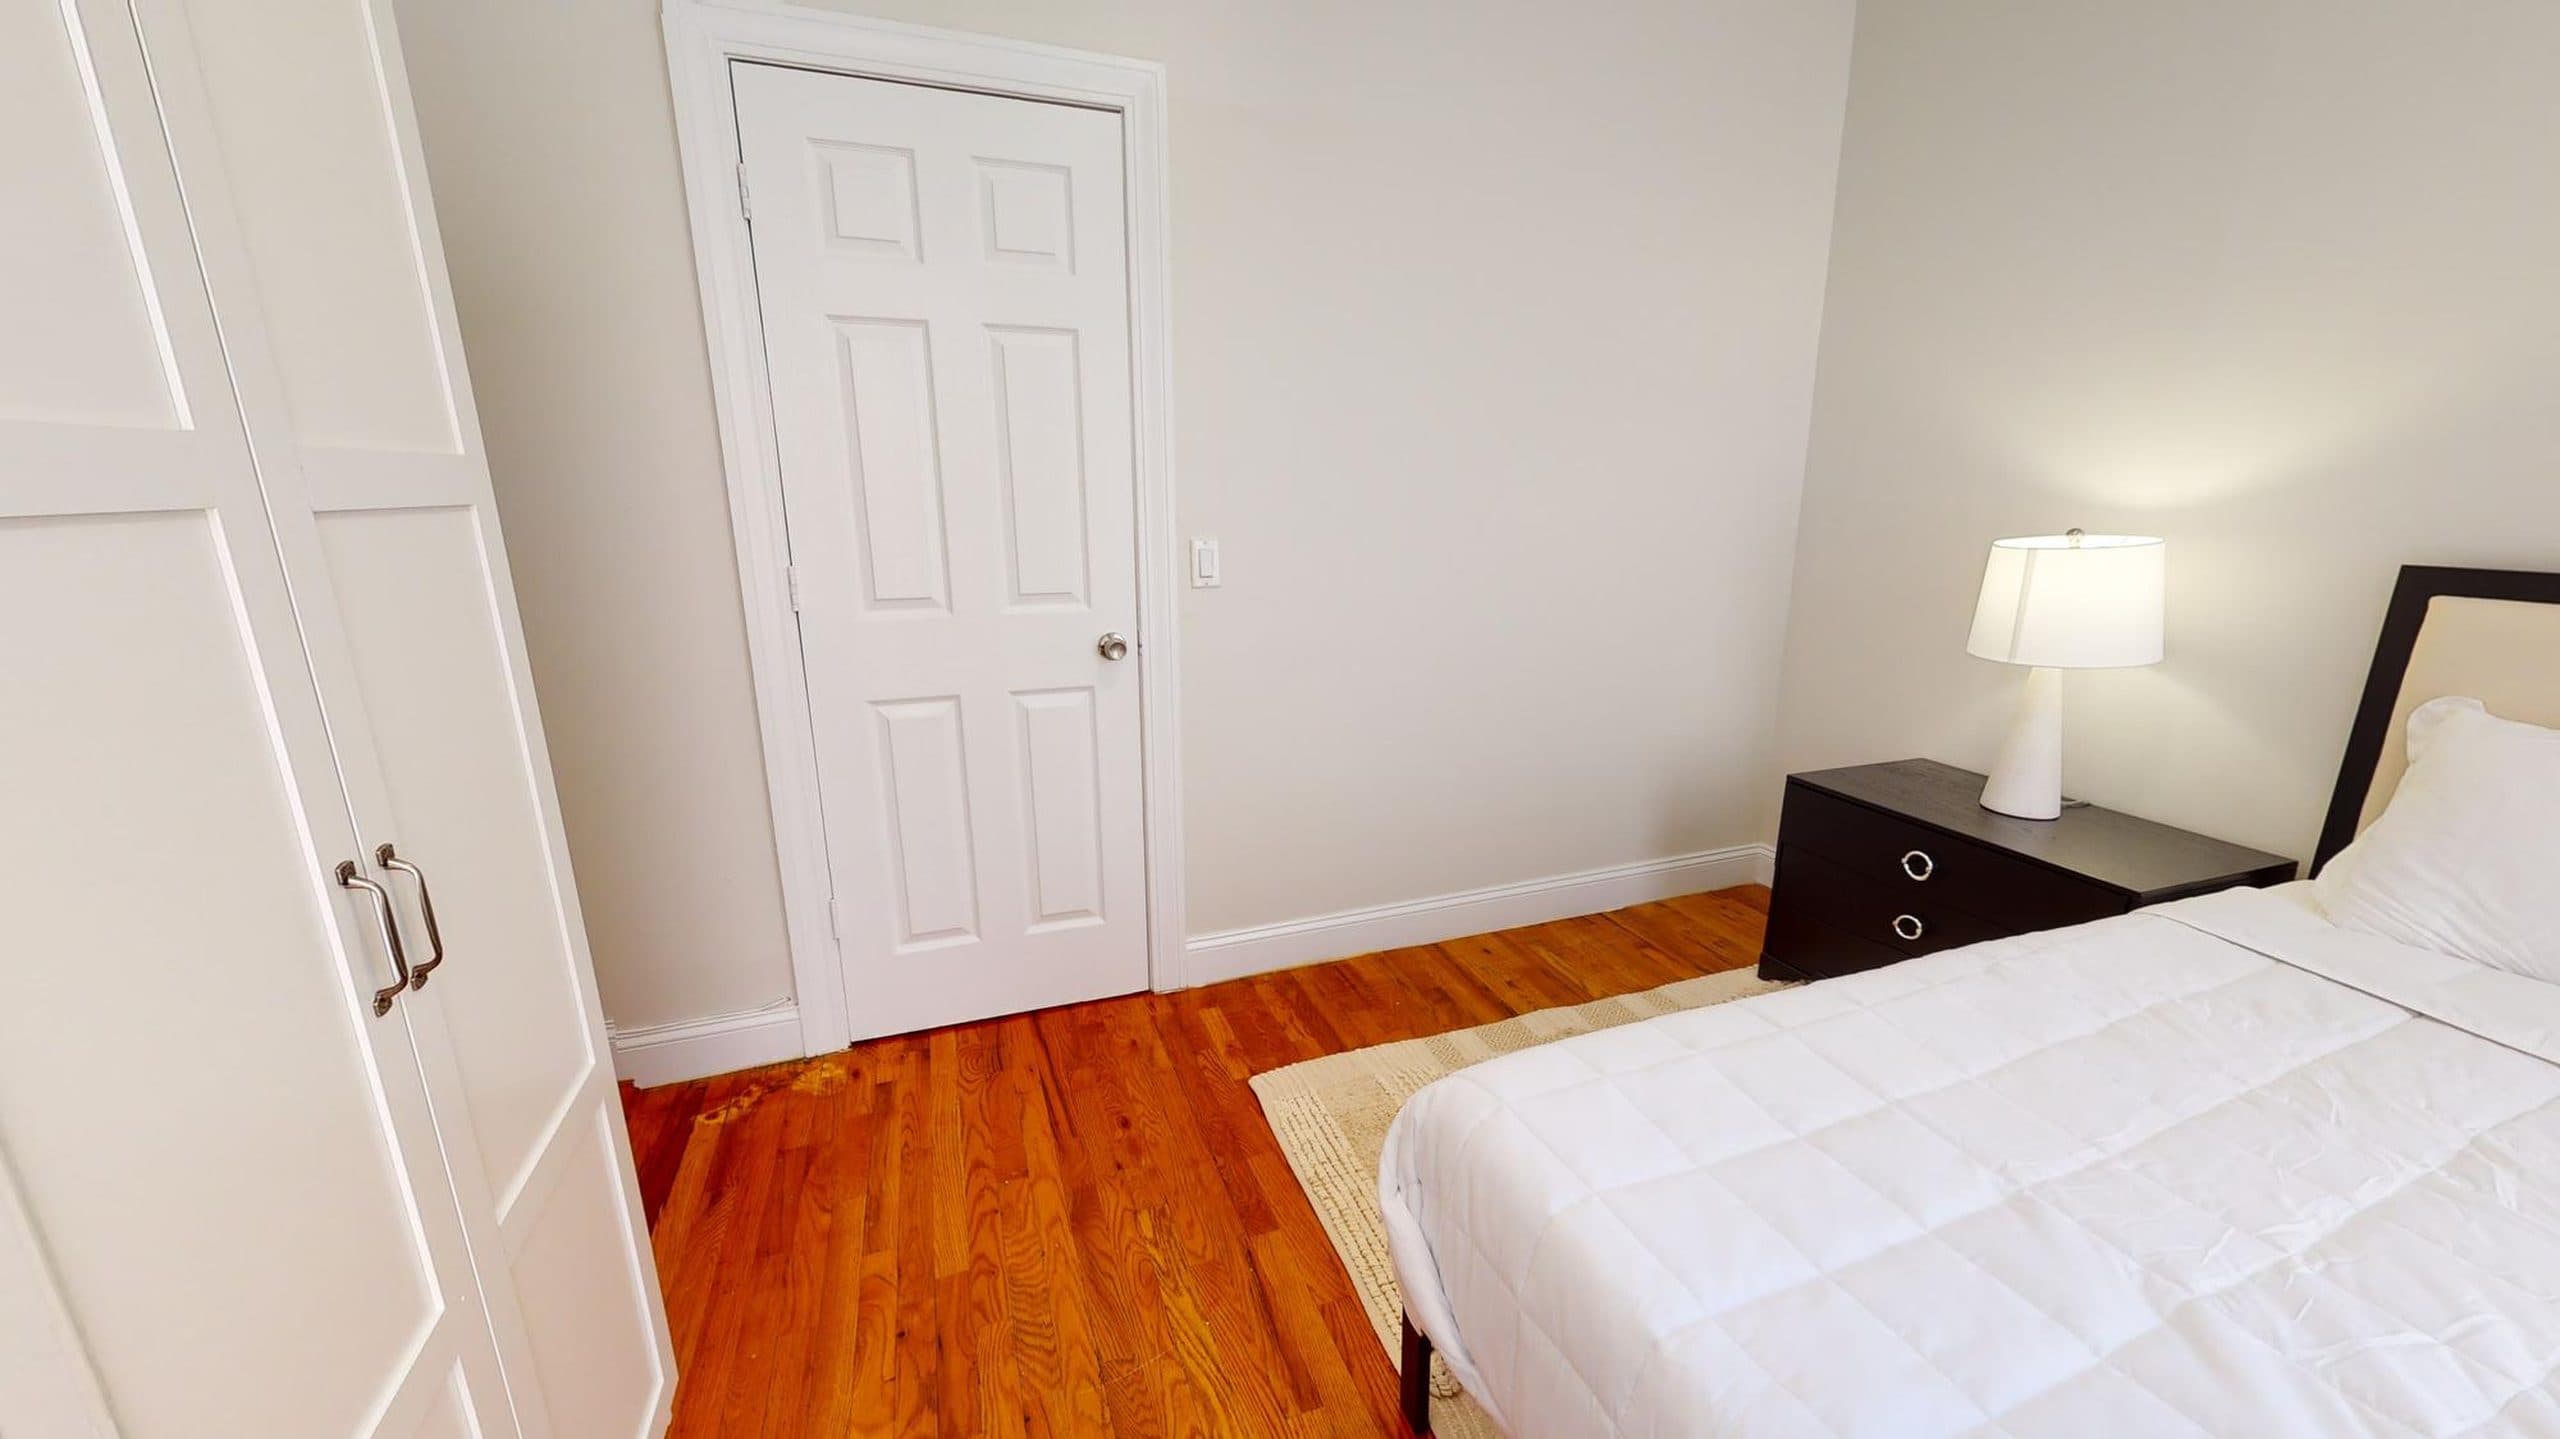 Photo 7 of #3610: Queen Bedroom A at June Homes